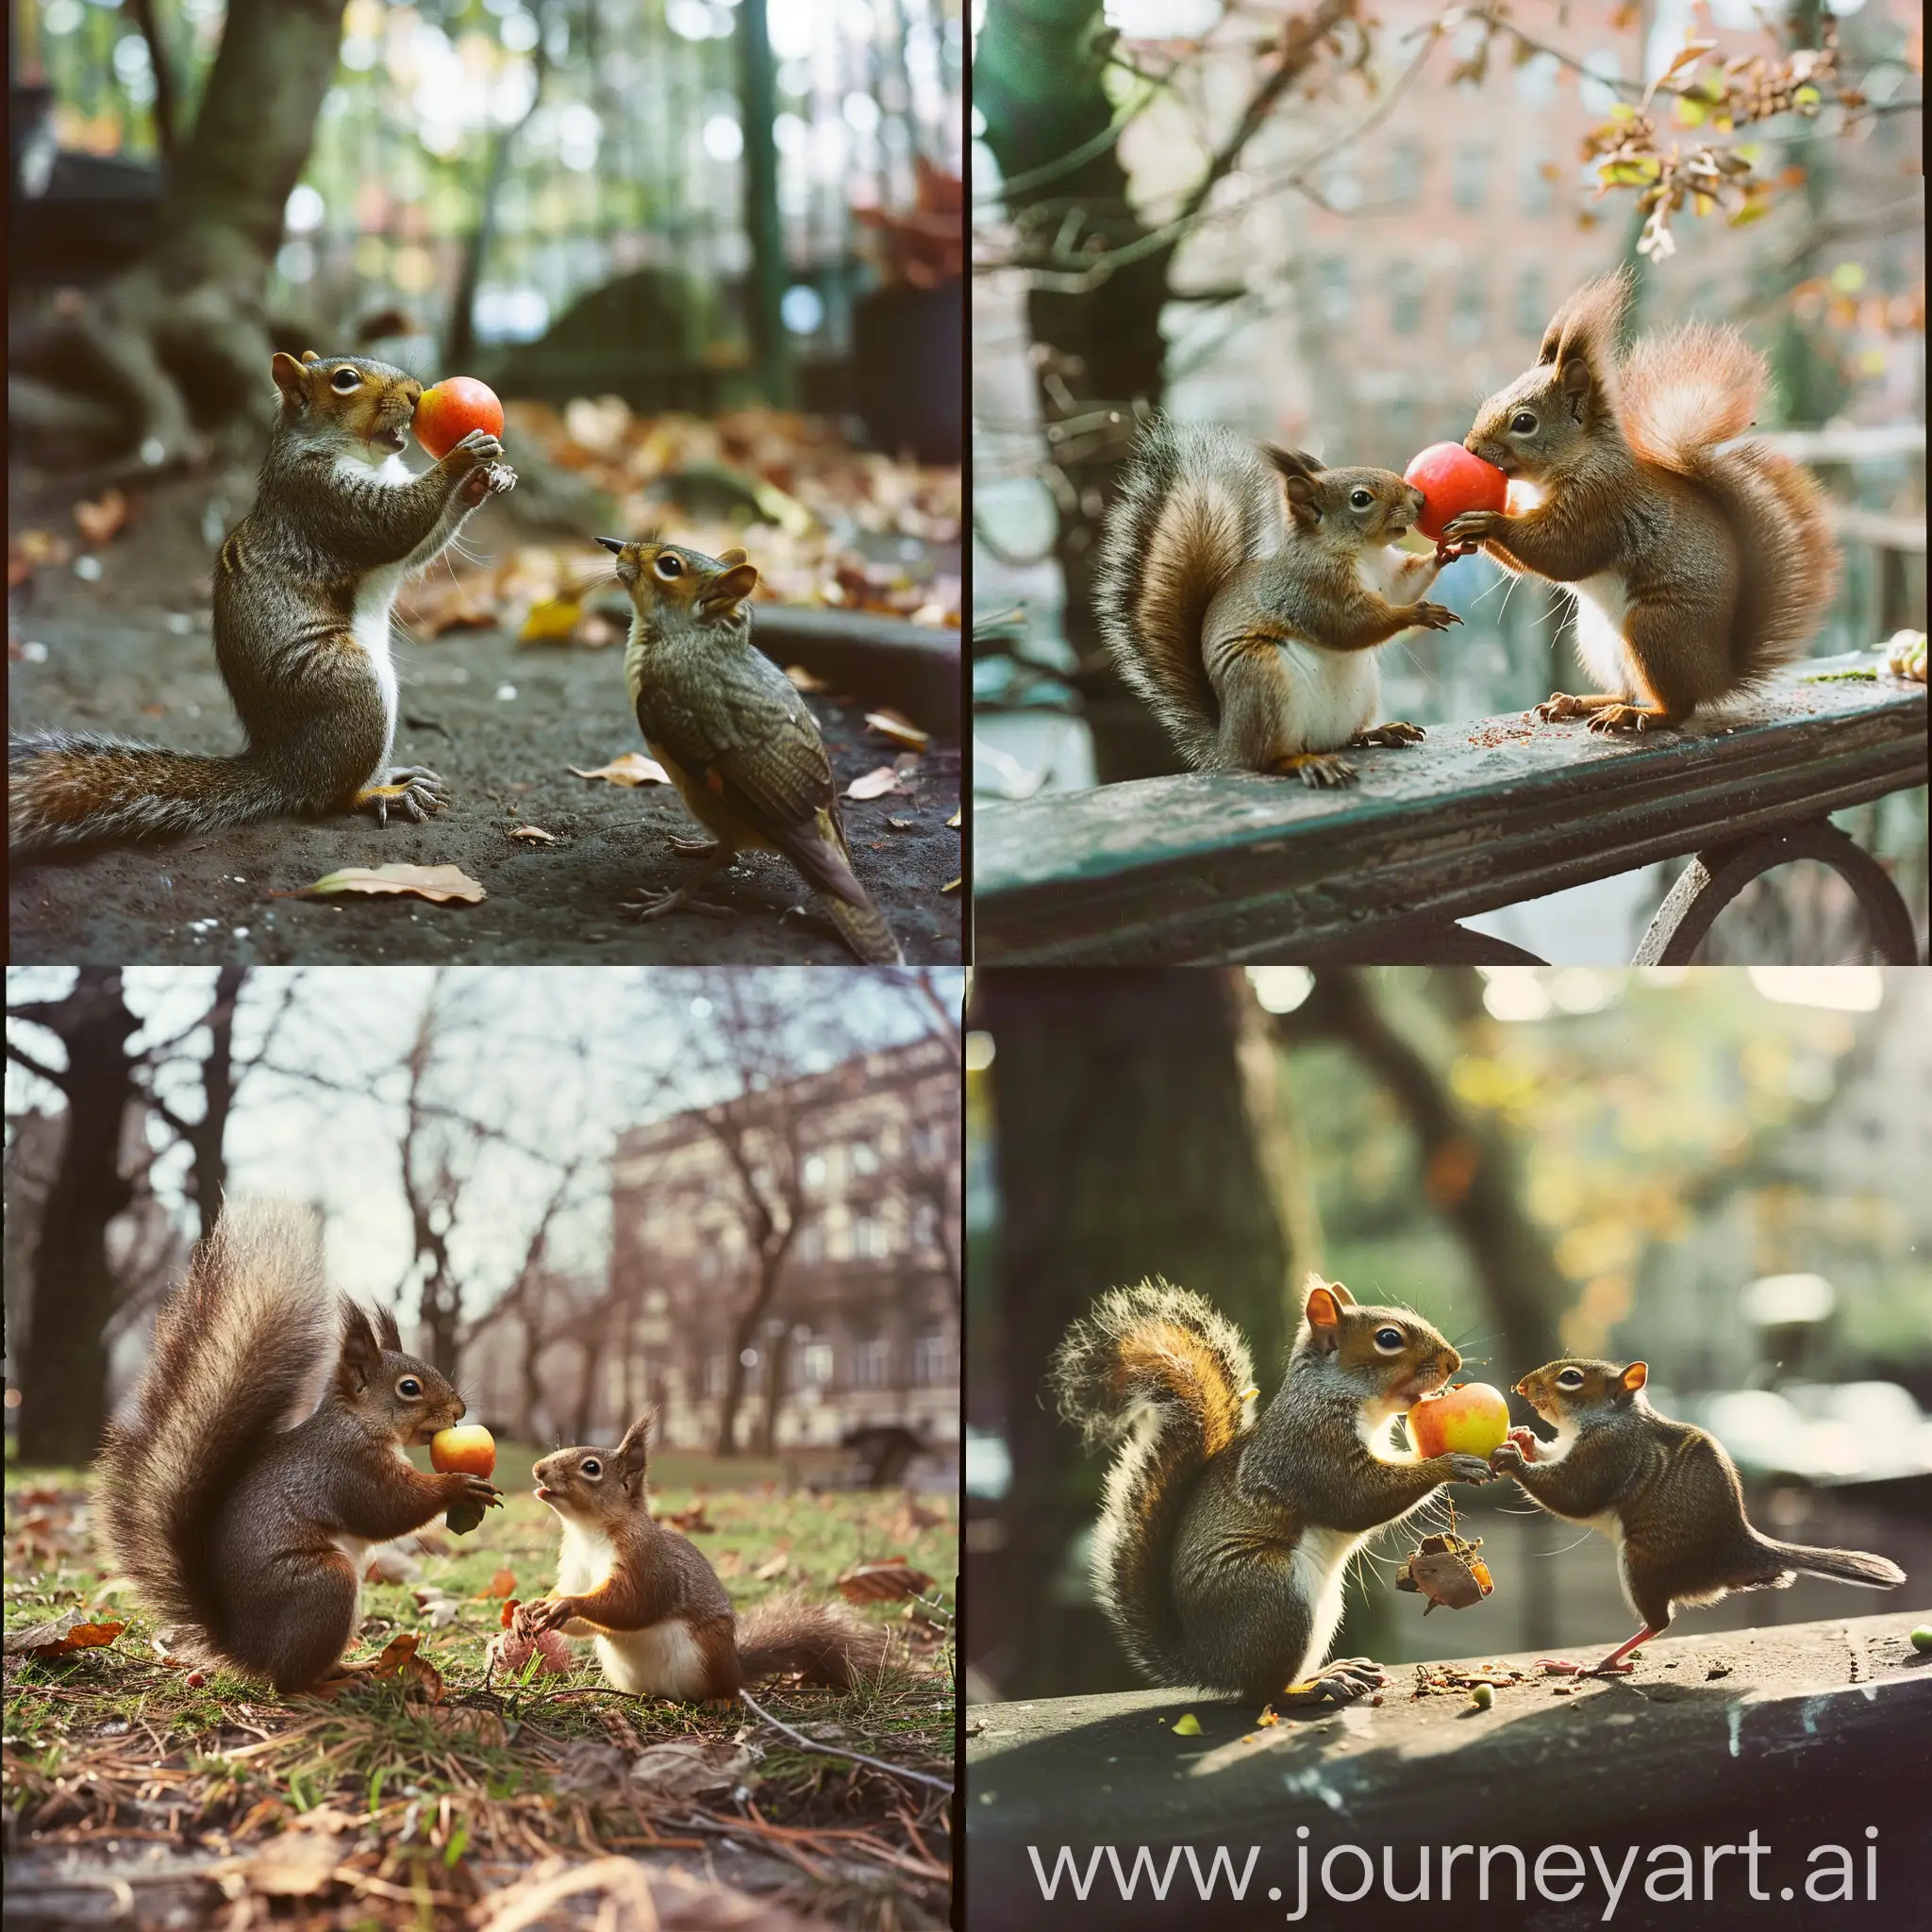 Whimsical-Moment-Squirrel-Sharing-Apple-with-Bird-in-Cinematic-Kodak-Kodachrome-Style